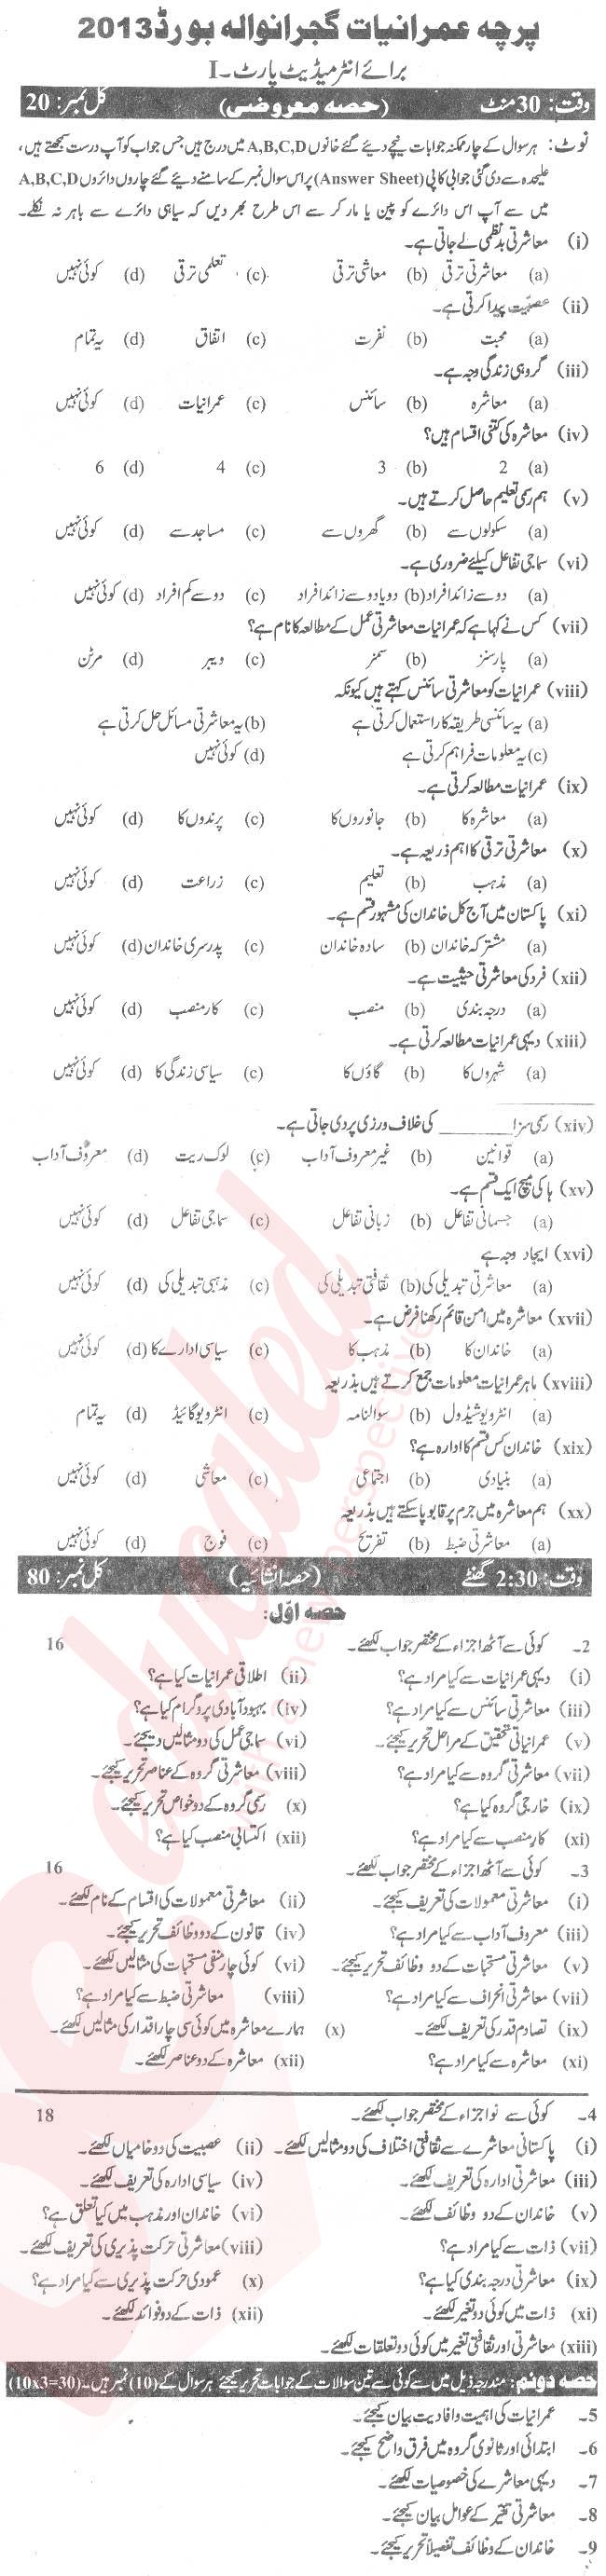 Sociology FA Part 1 Past Paper Group 1 BISE Gujranwala 2013